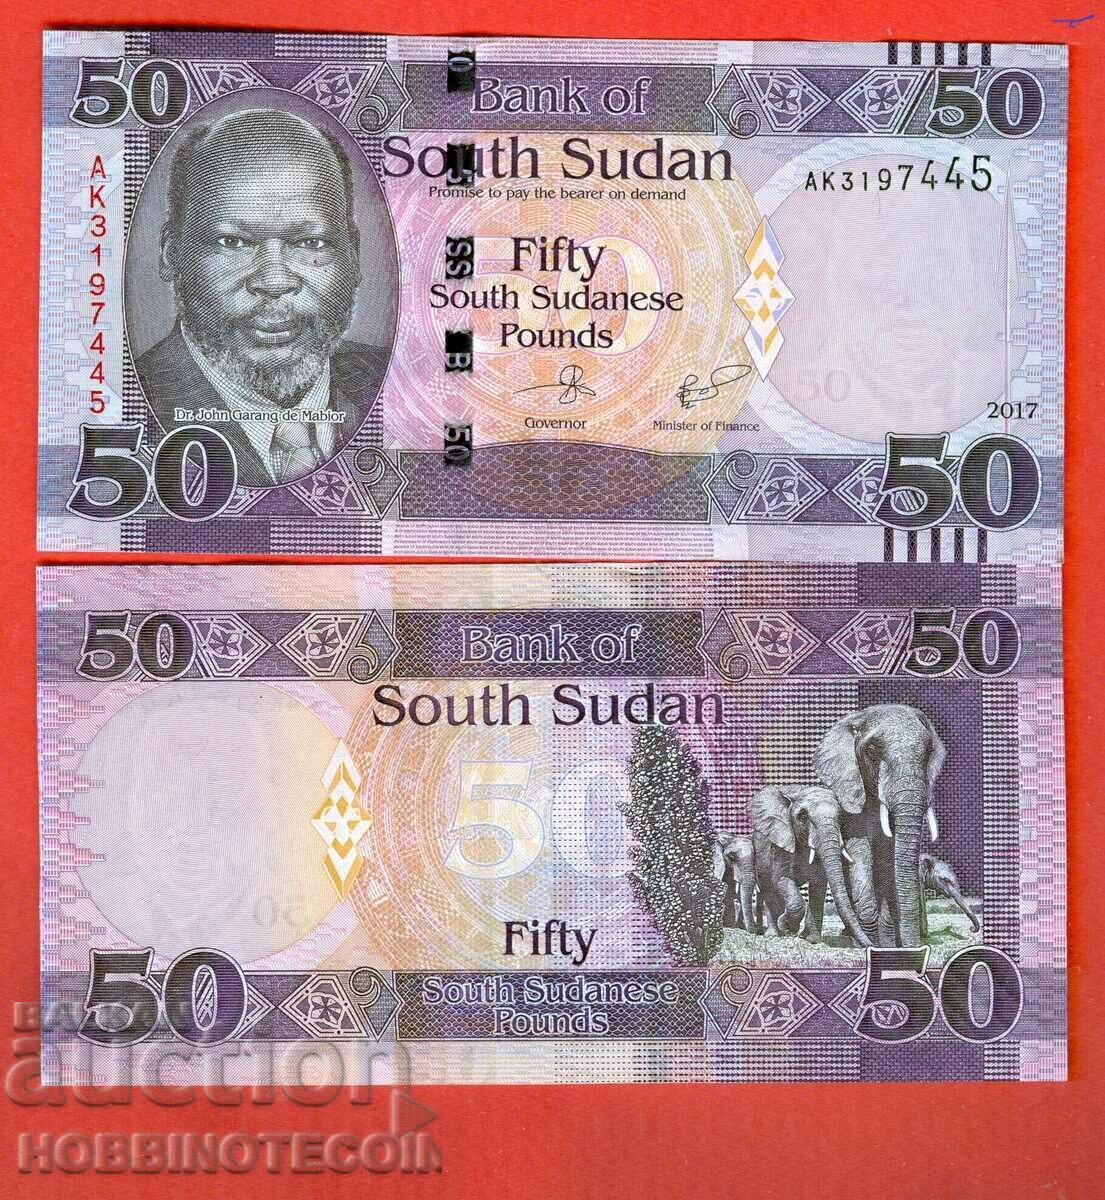 SOUTH SUDAN SOUTH SUDAN 50 issue - issue 2017 NEW UNC